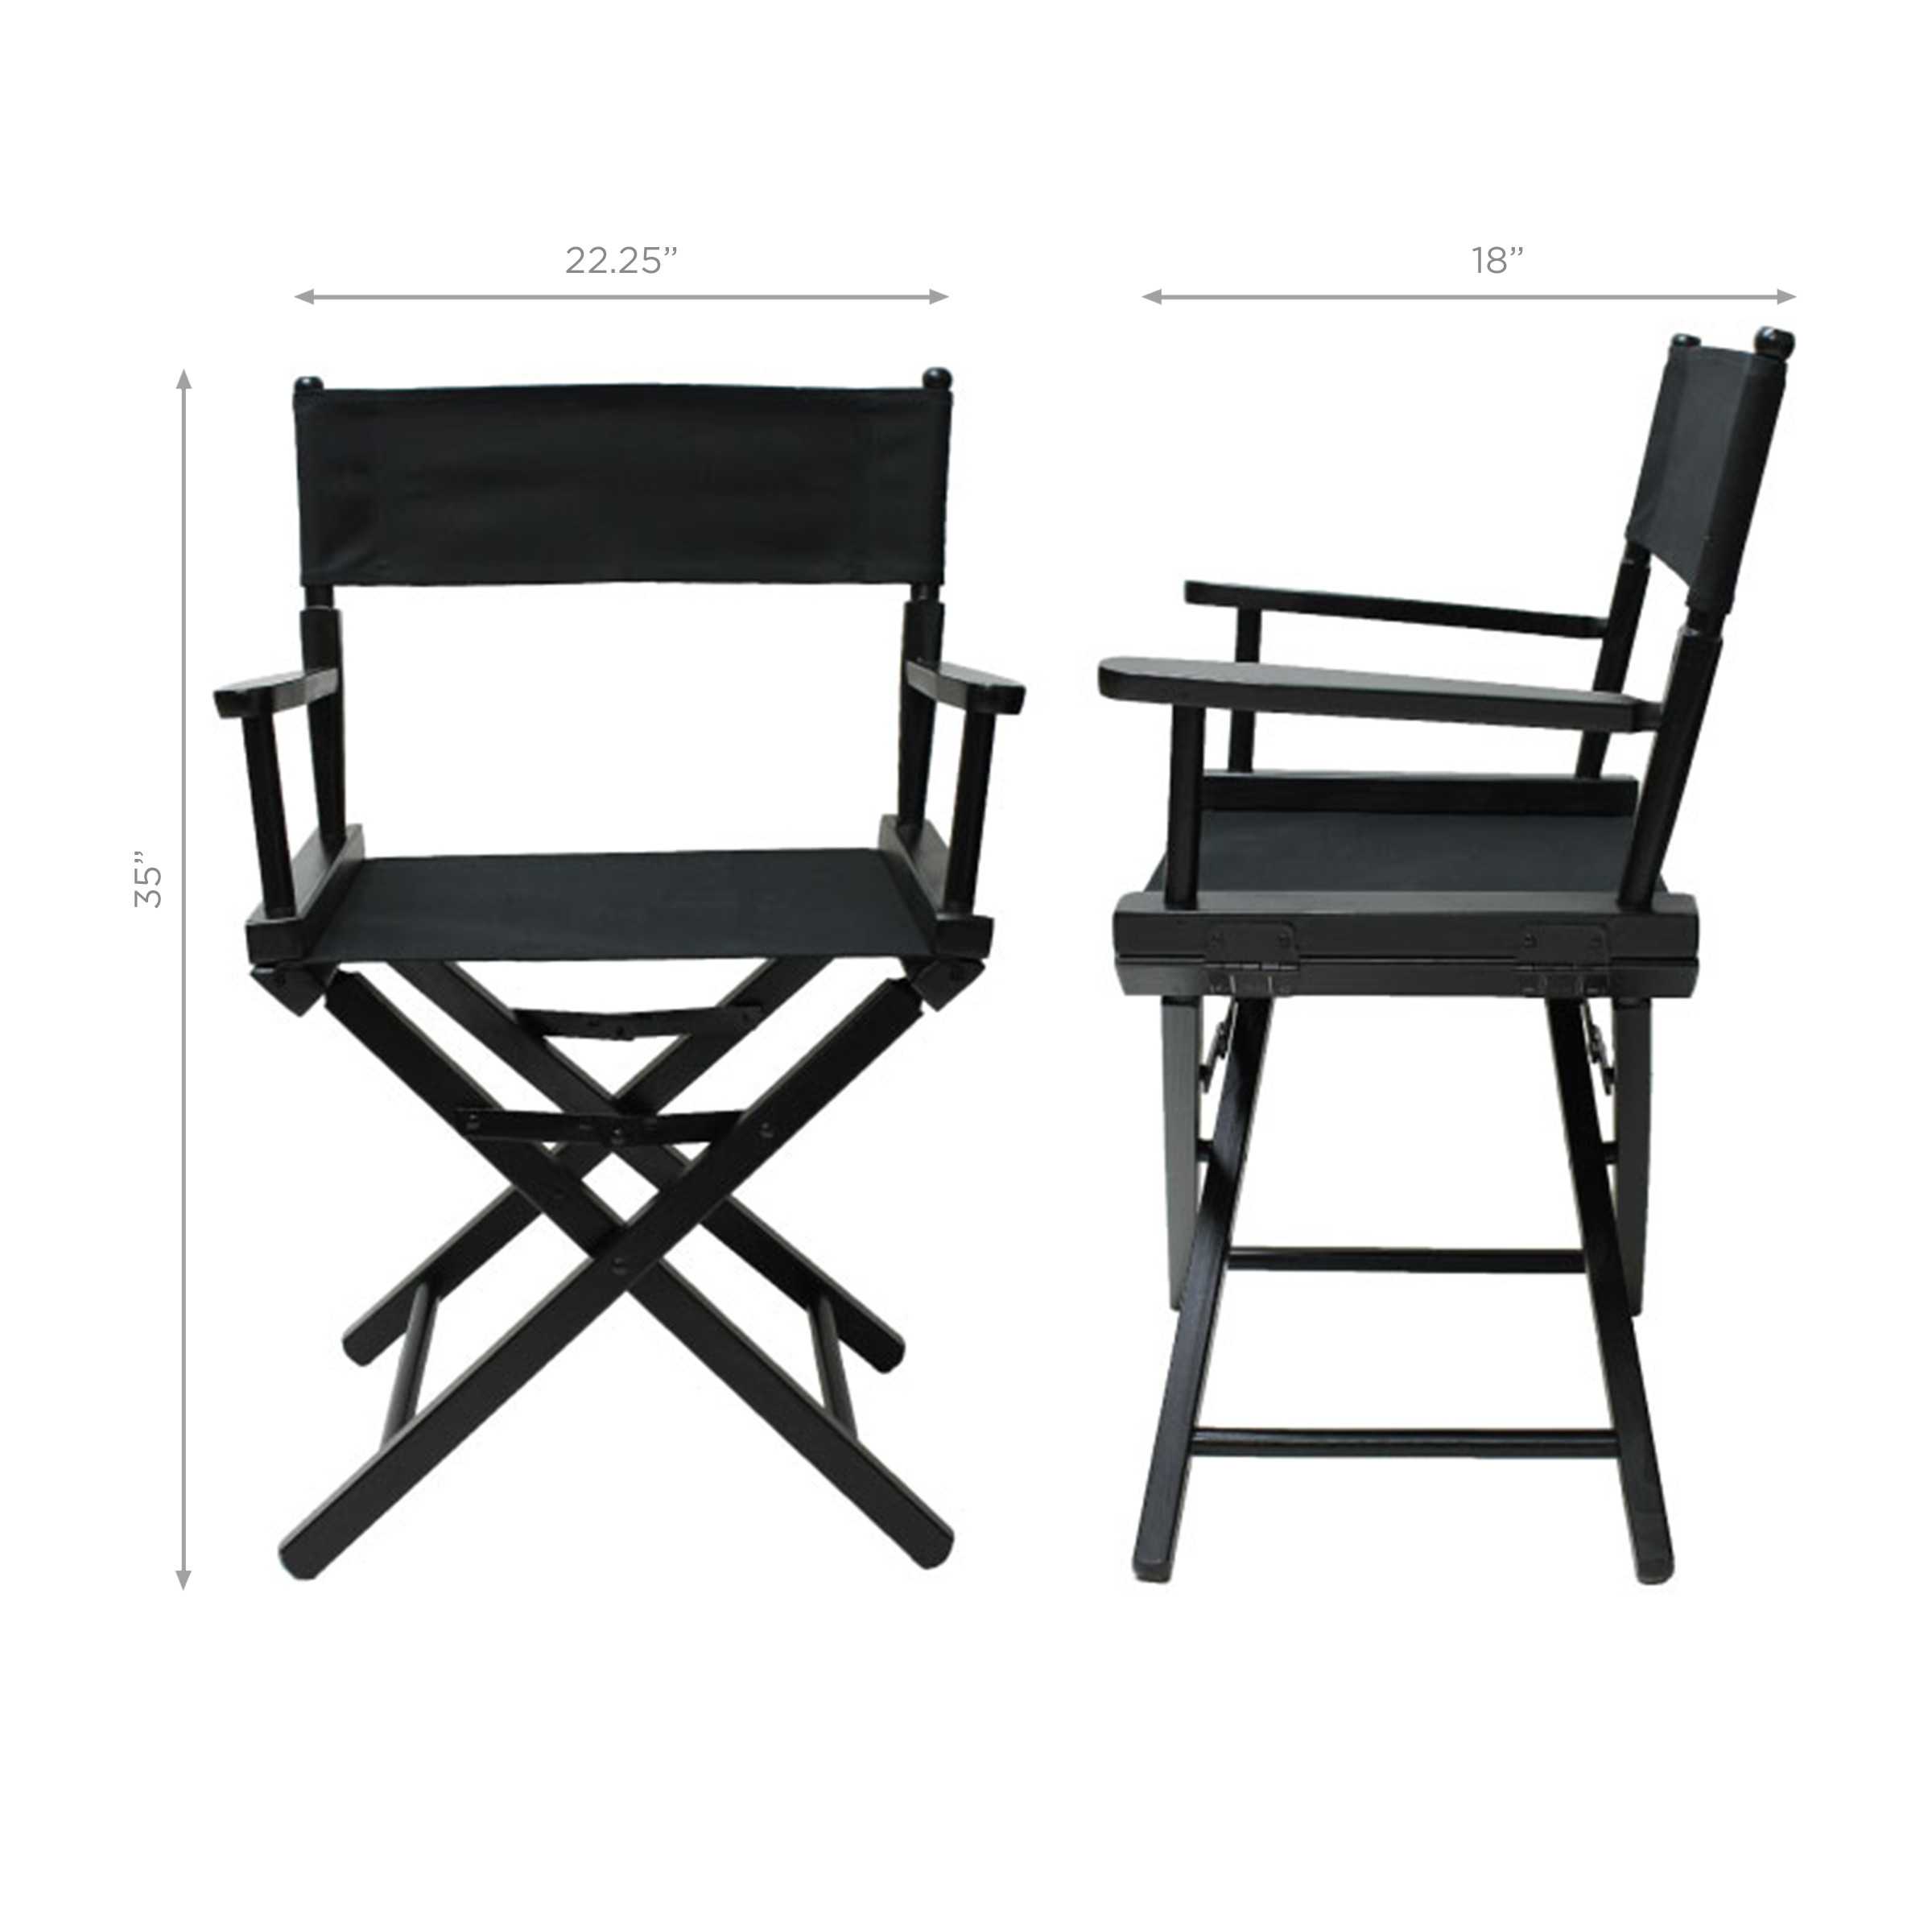 MIAMI DOLPHINS TABLE HEIGHT DIRECTORS CHAIR